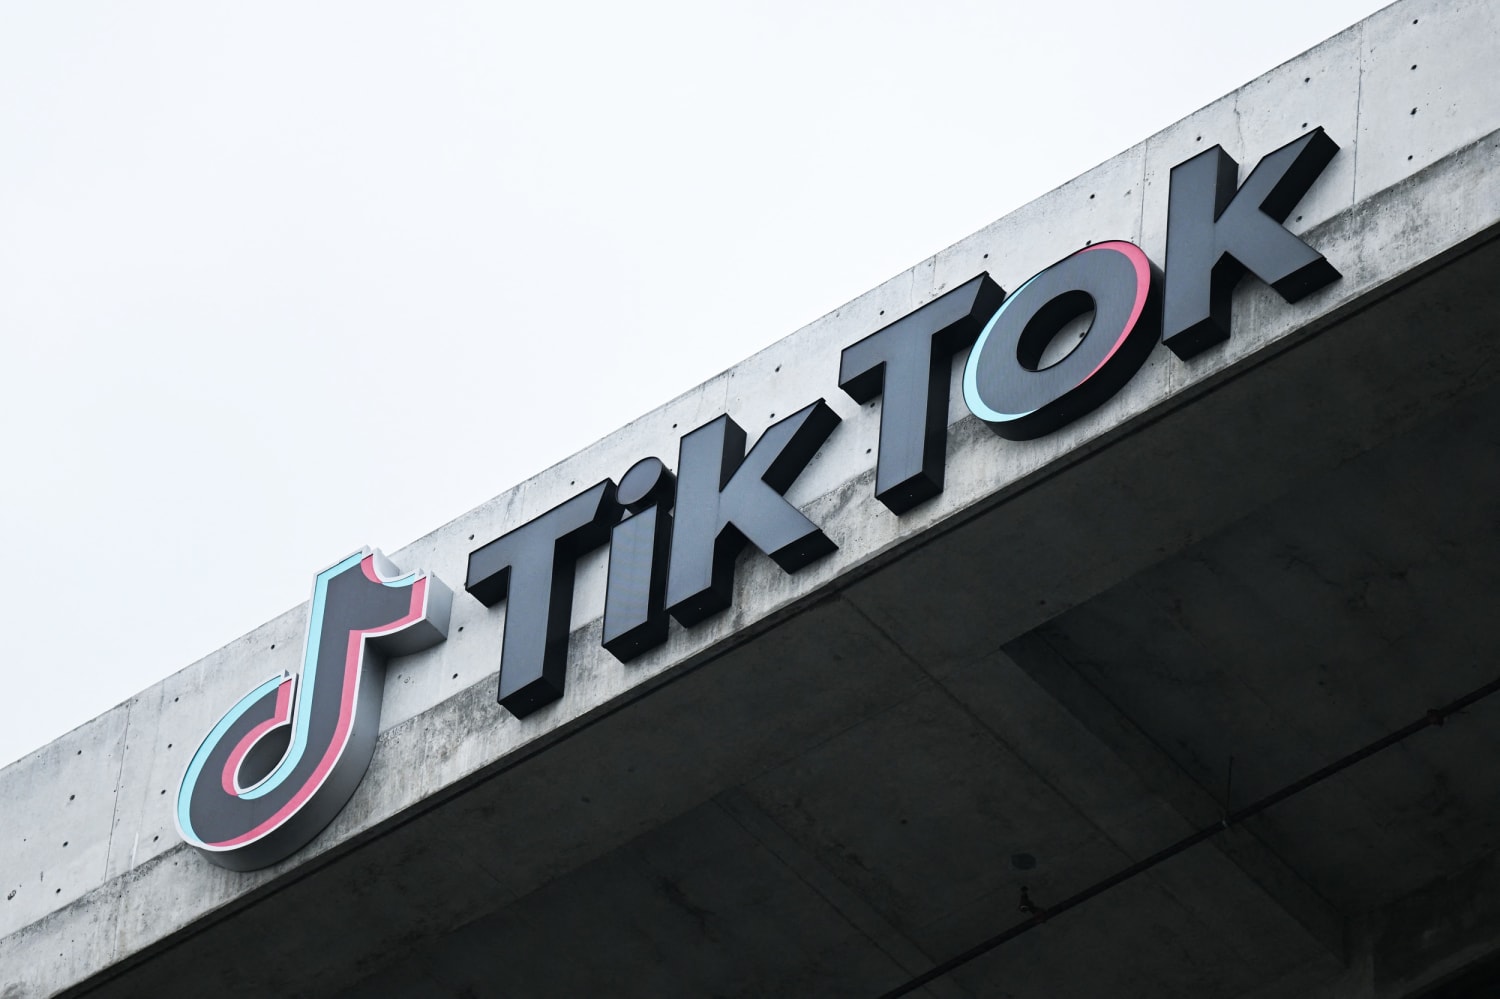 TikTok now has 150 million active users in the U.S., CEO to tell Congress